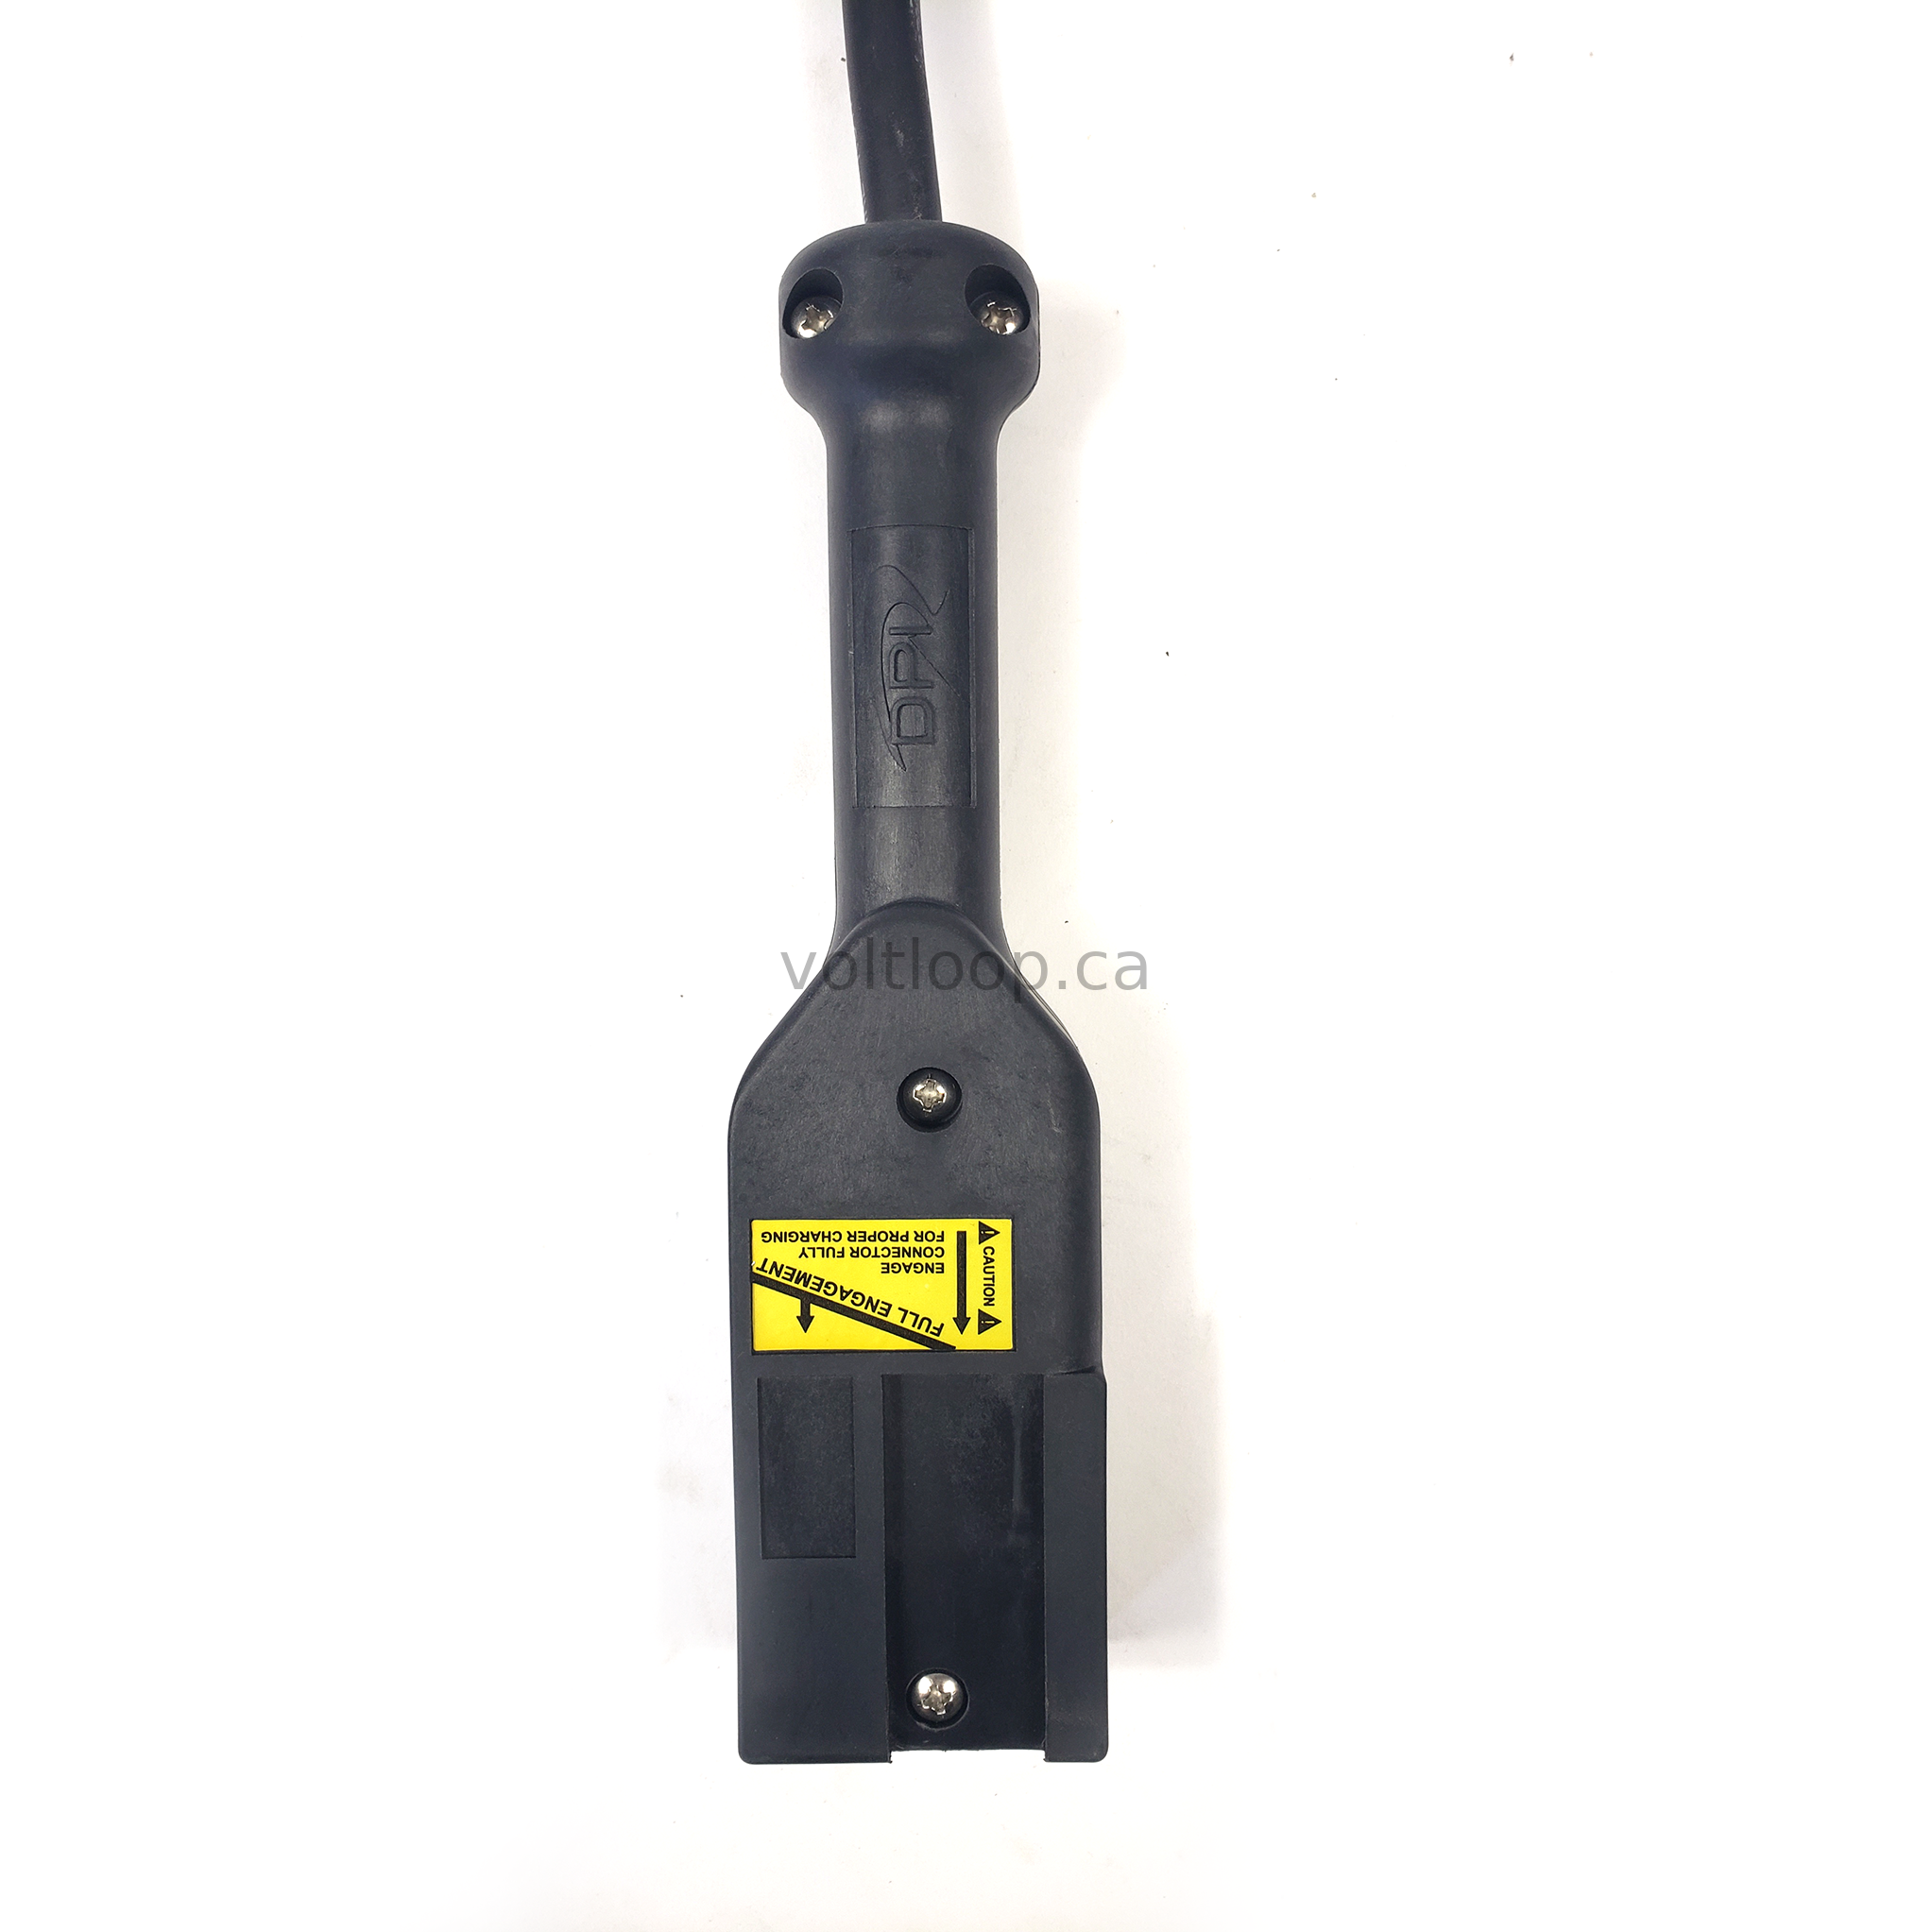 EZGO 48V TXT Powerwise with Notch Golf Cart Connector